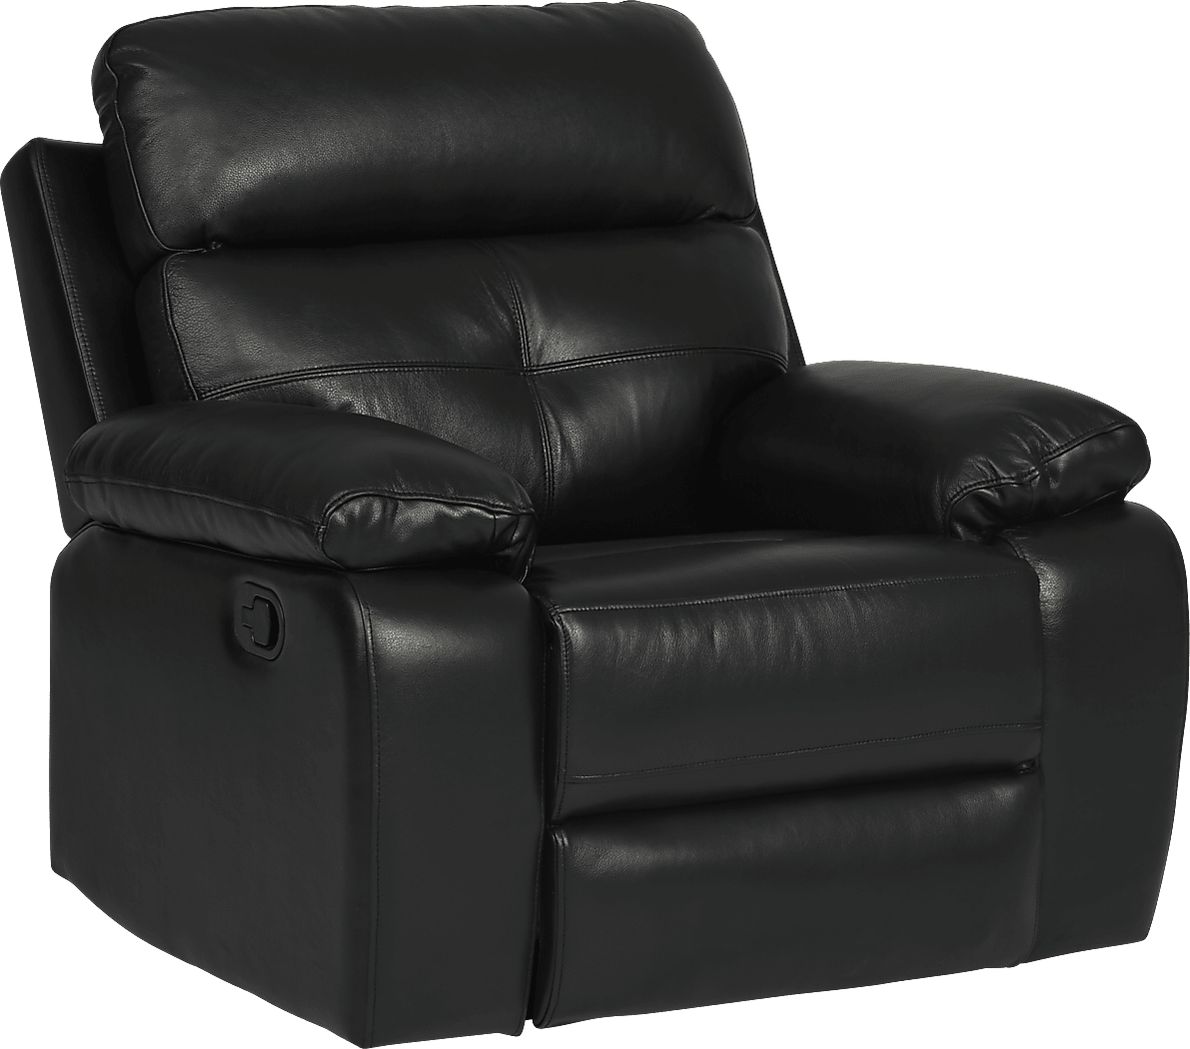 Cepano Black Leather Glider Recliner - Rooms To Go